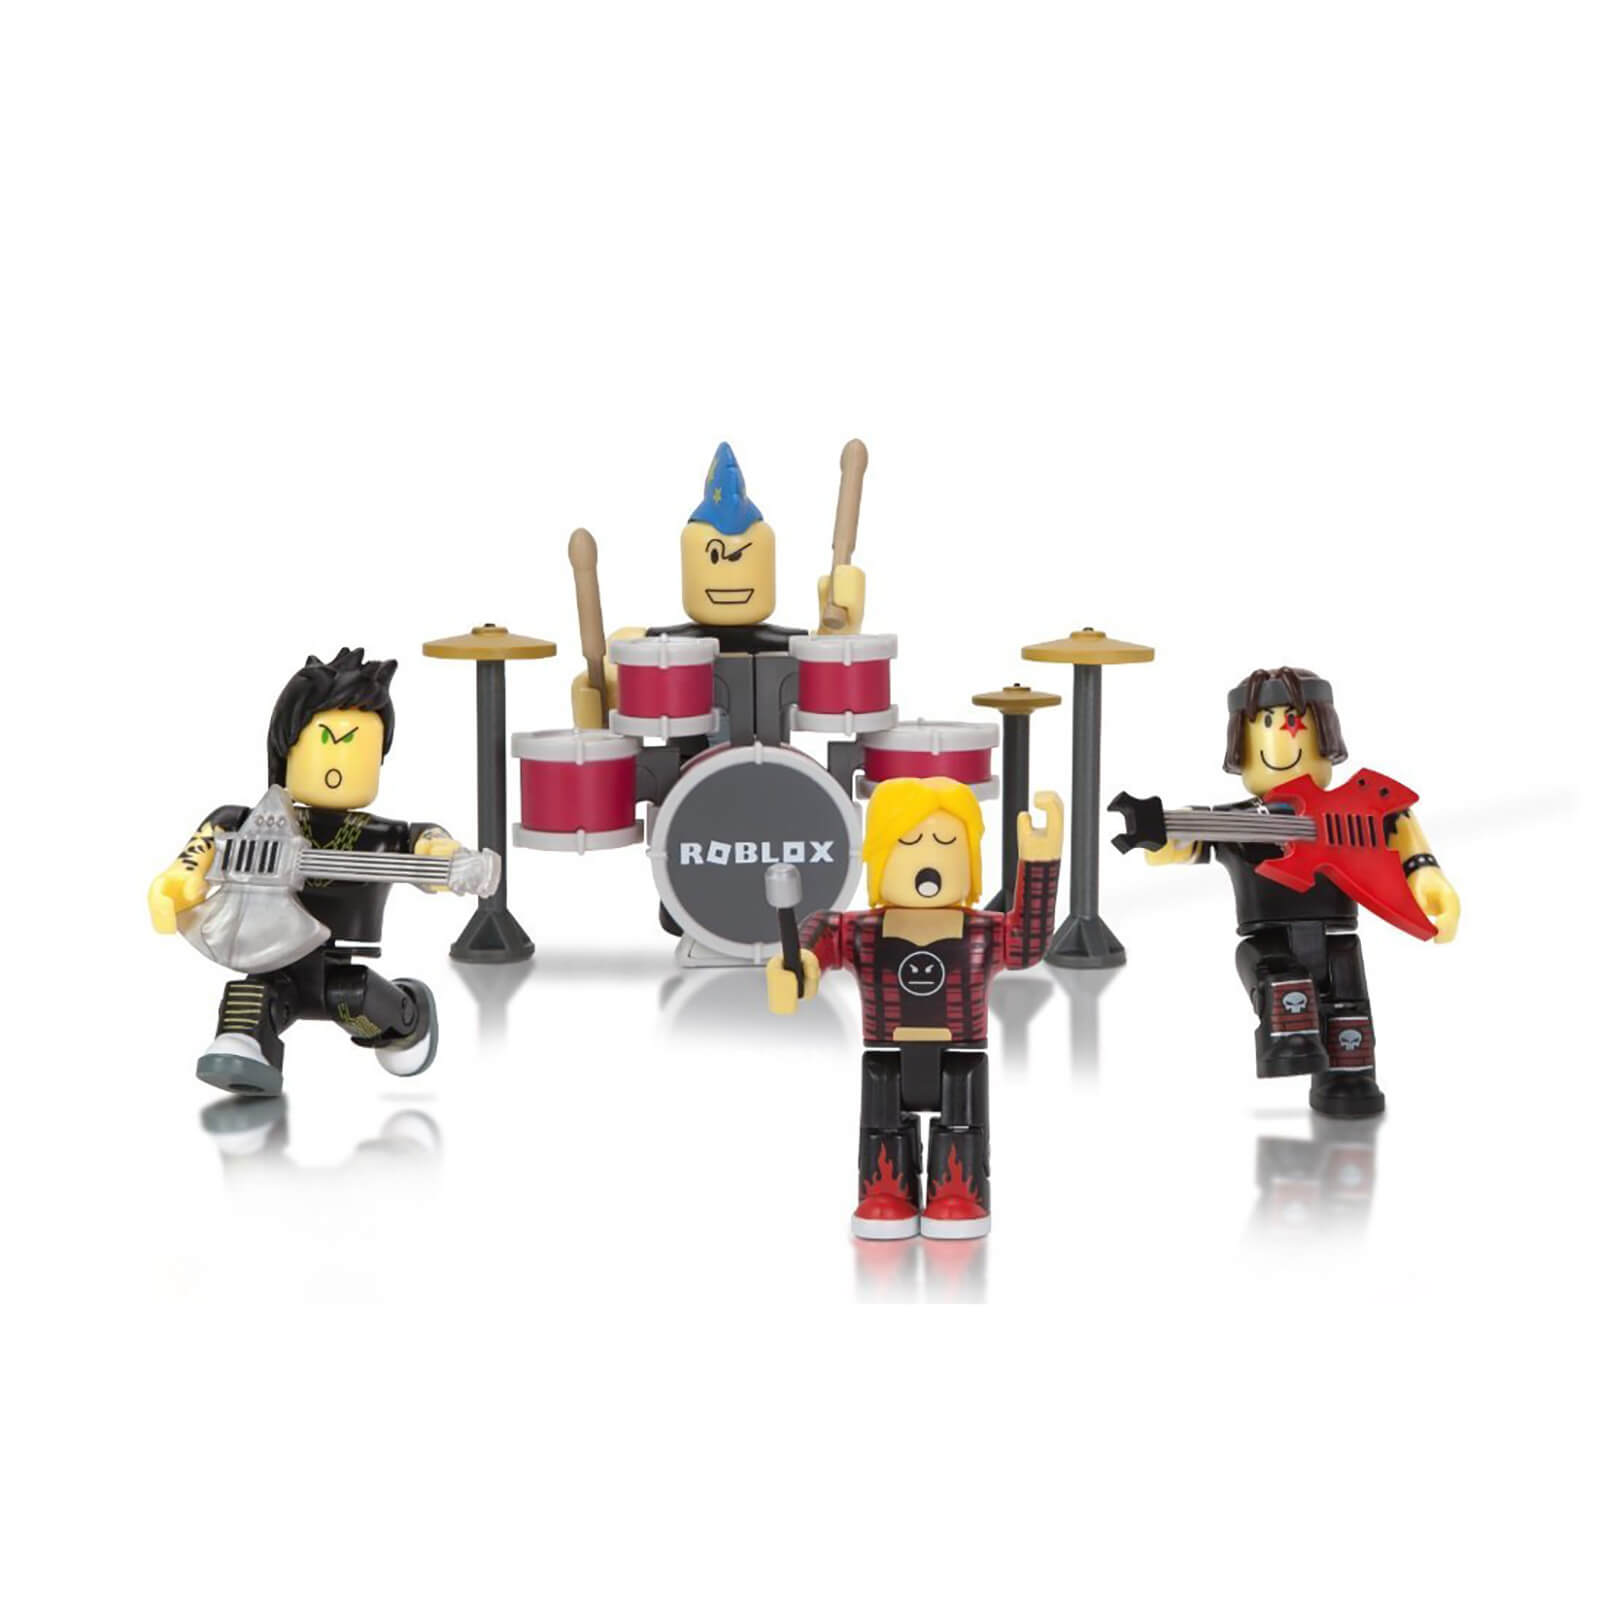 Roblox Garage Band Build A Figure - build your own roblox figure